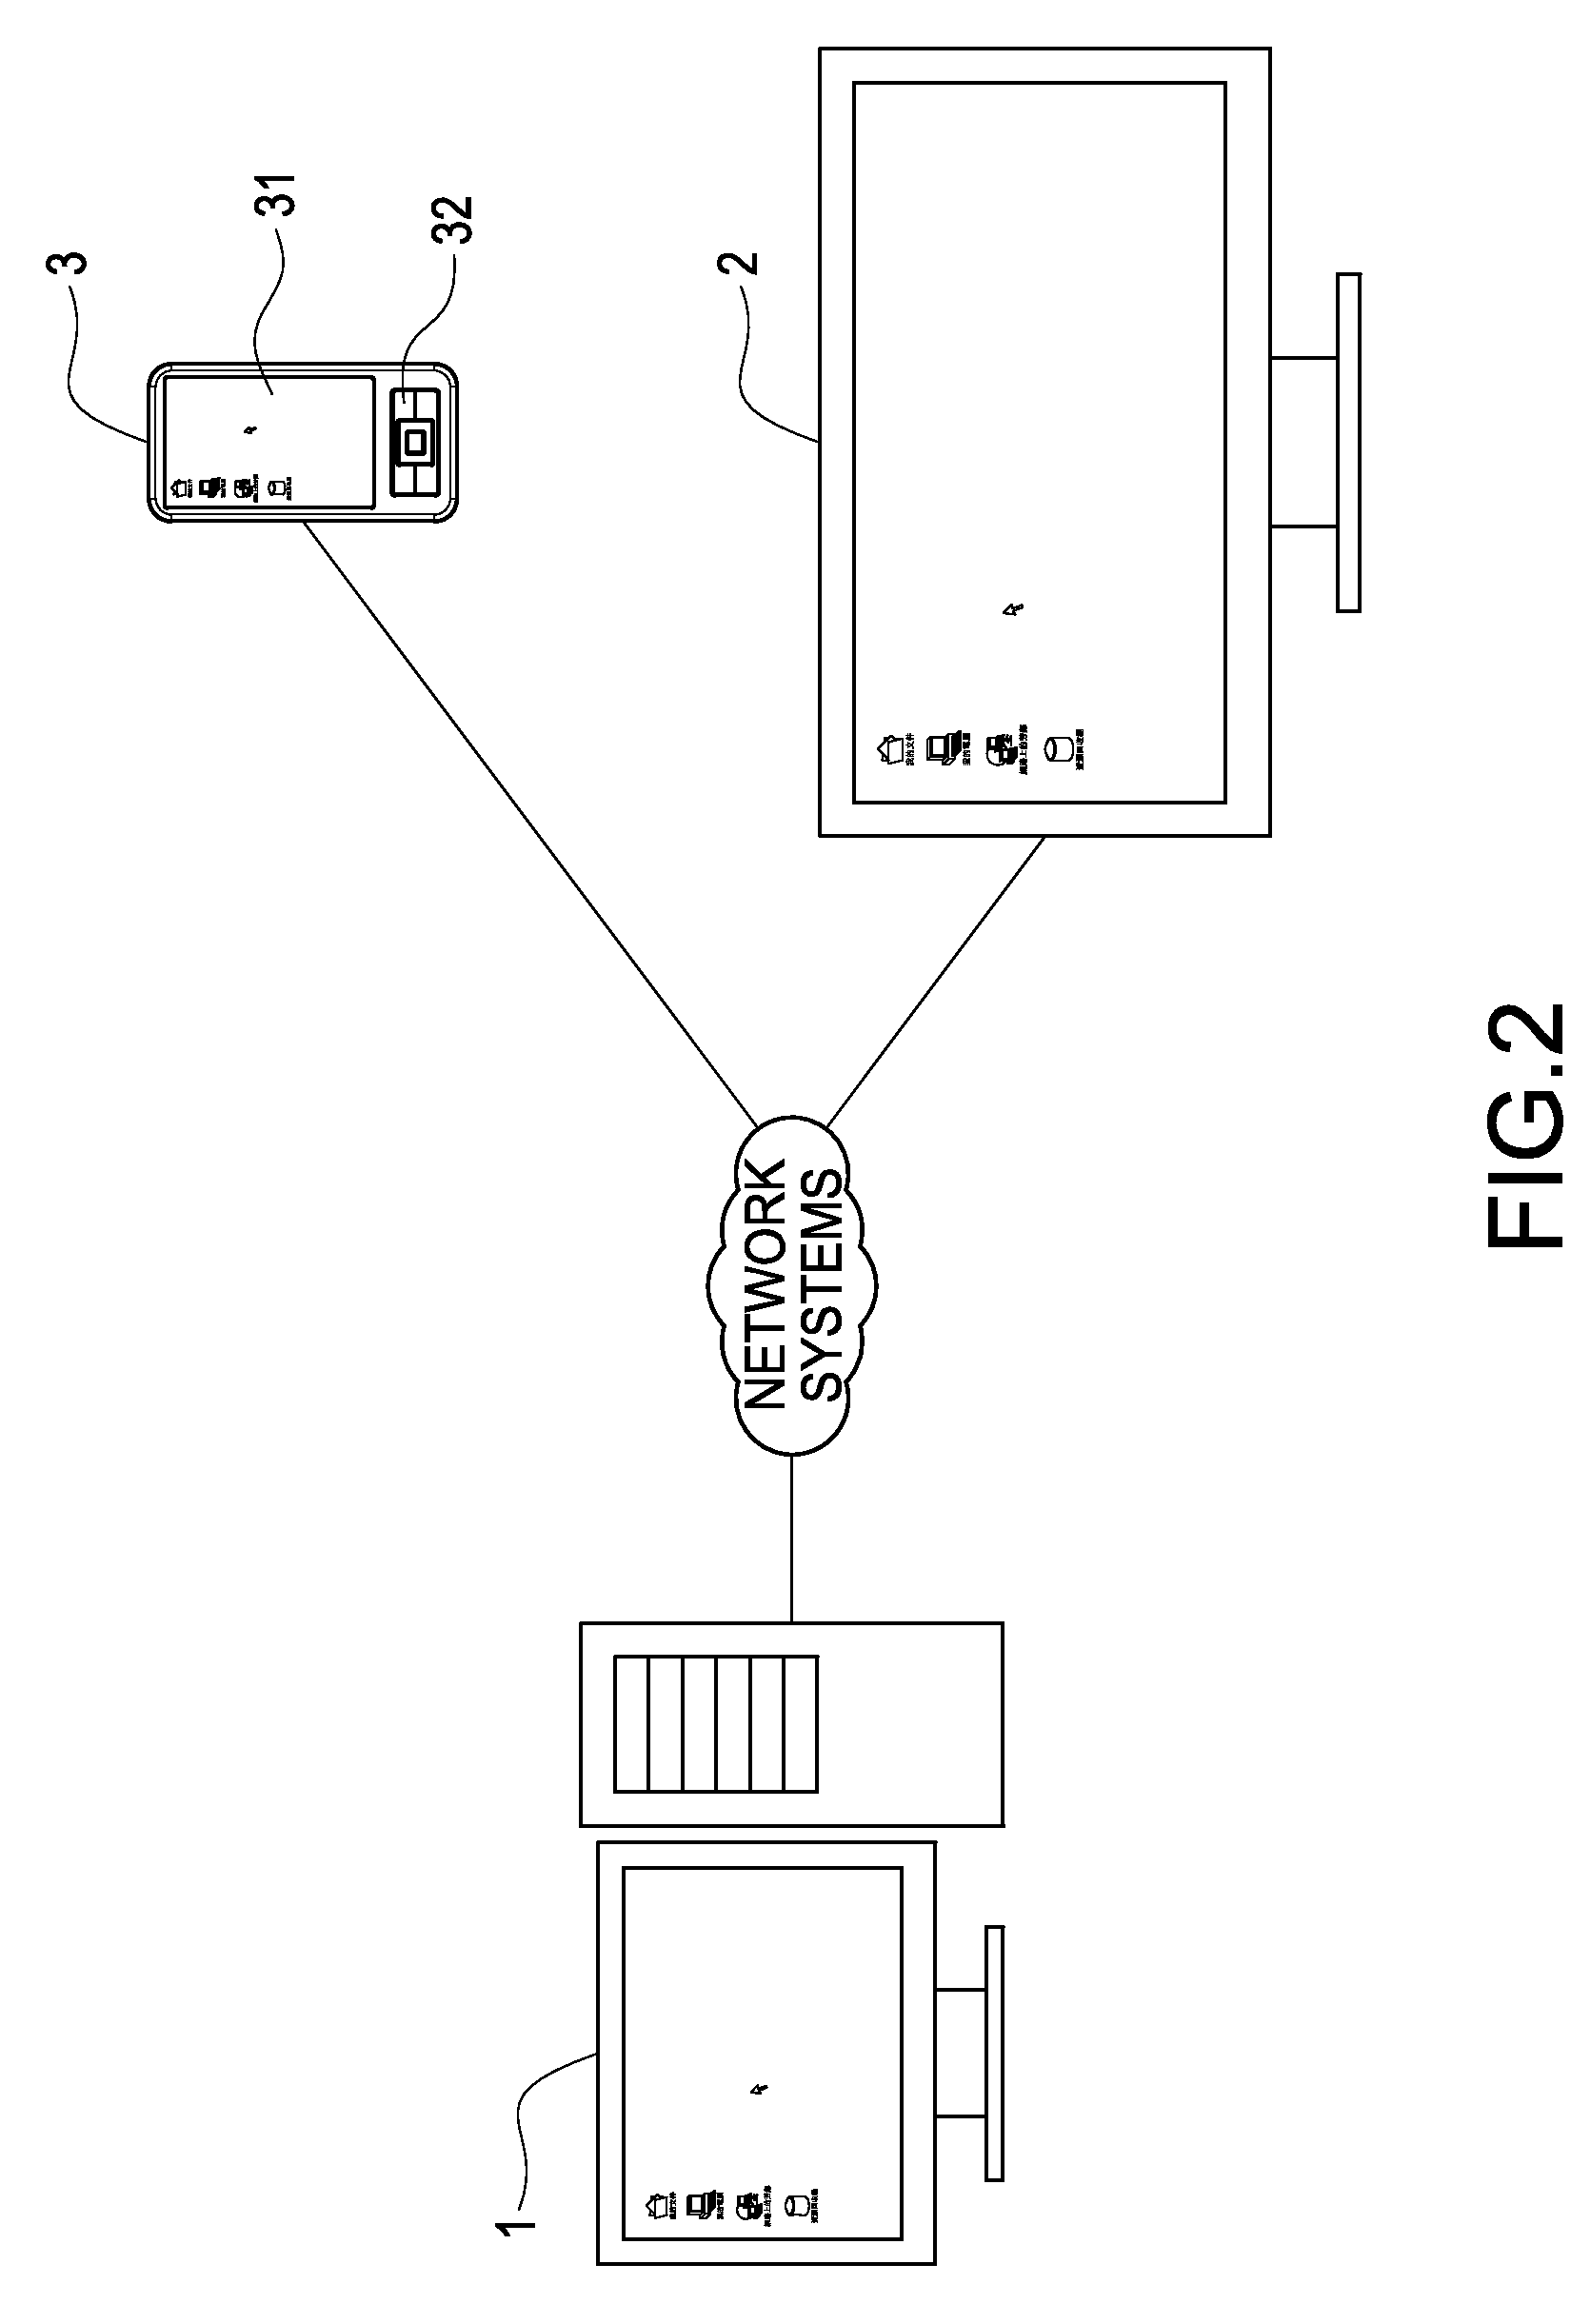 Remote audio-video sharing method and application program for the same